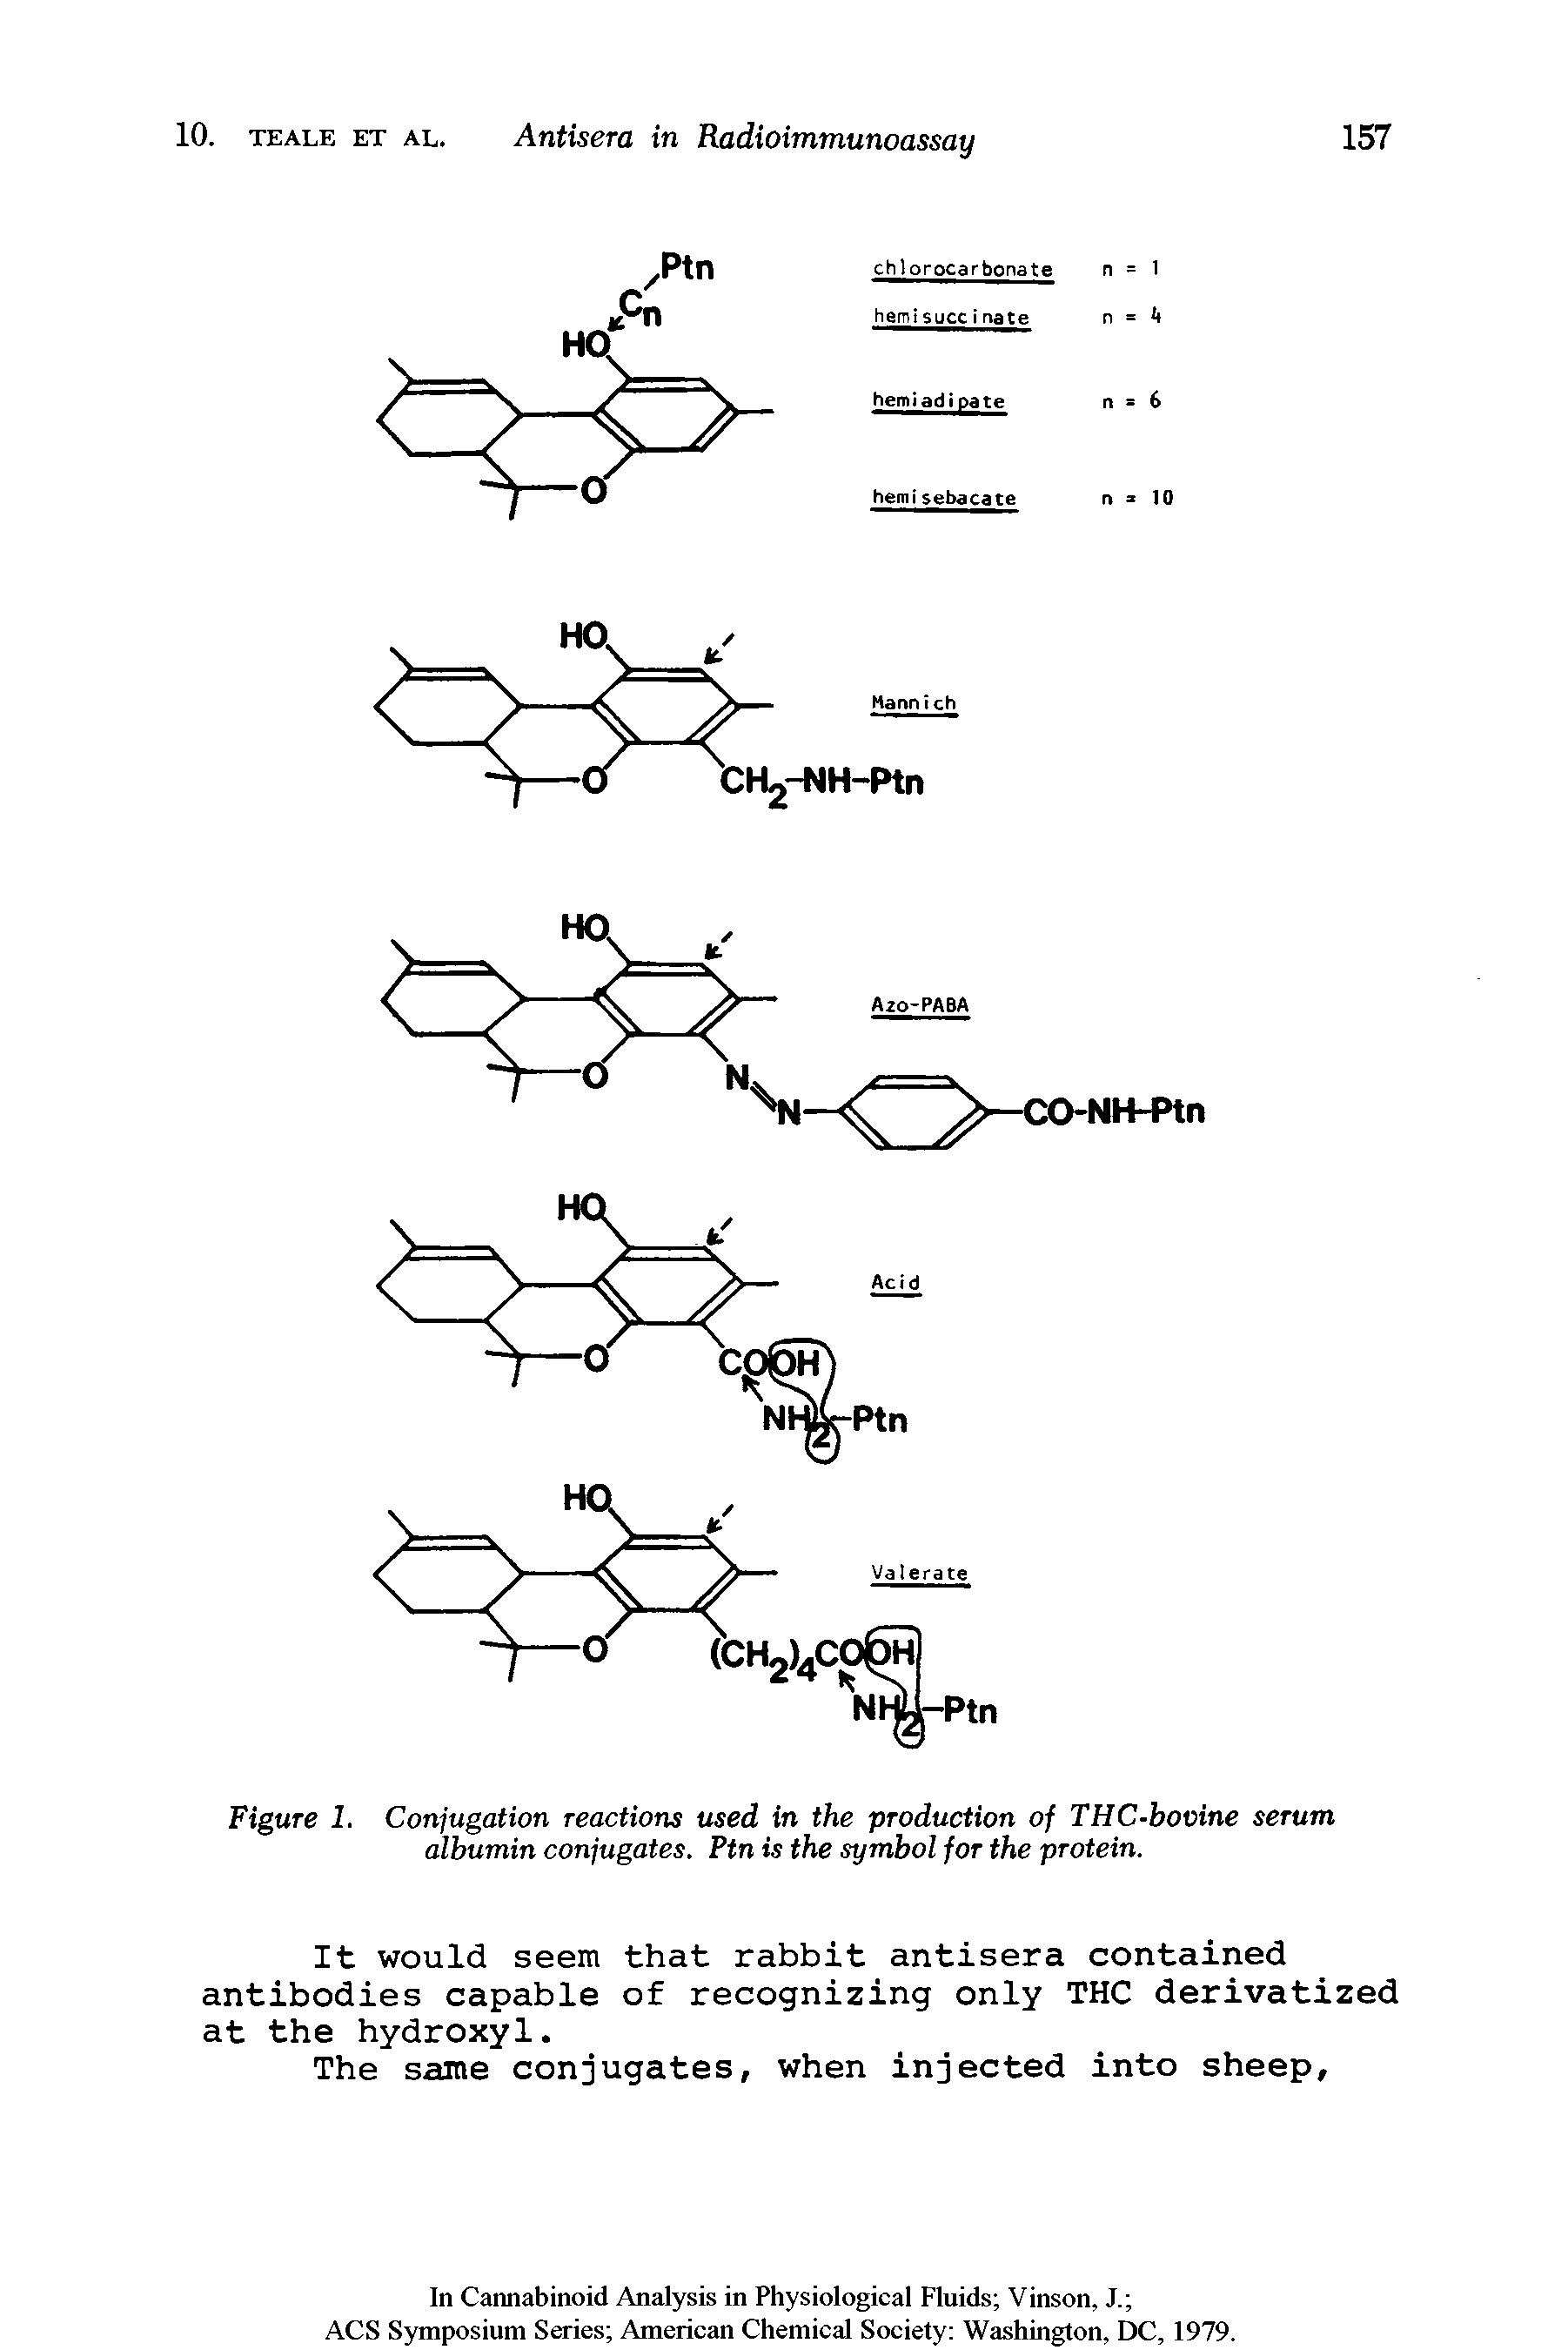 Figure 1. Conjugation reactions used in the production of THC-bovine serum albumin conjugates. Ptn is the symbol for the protein.